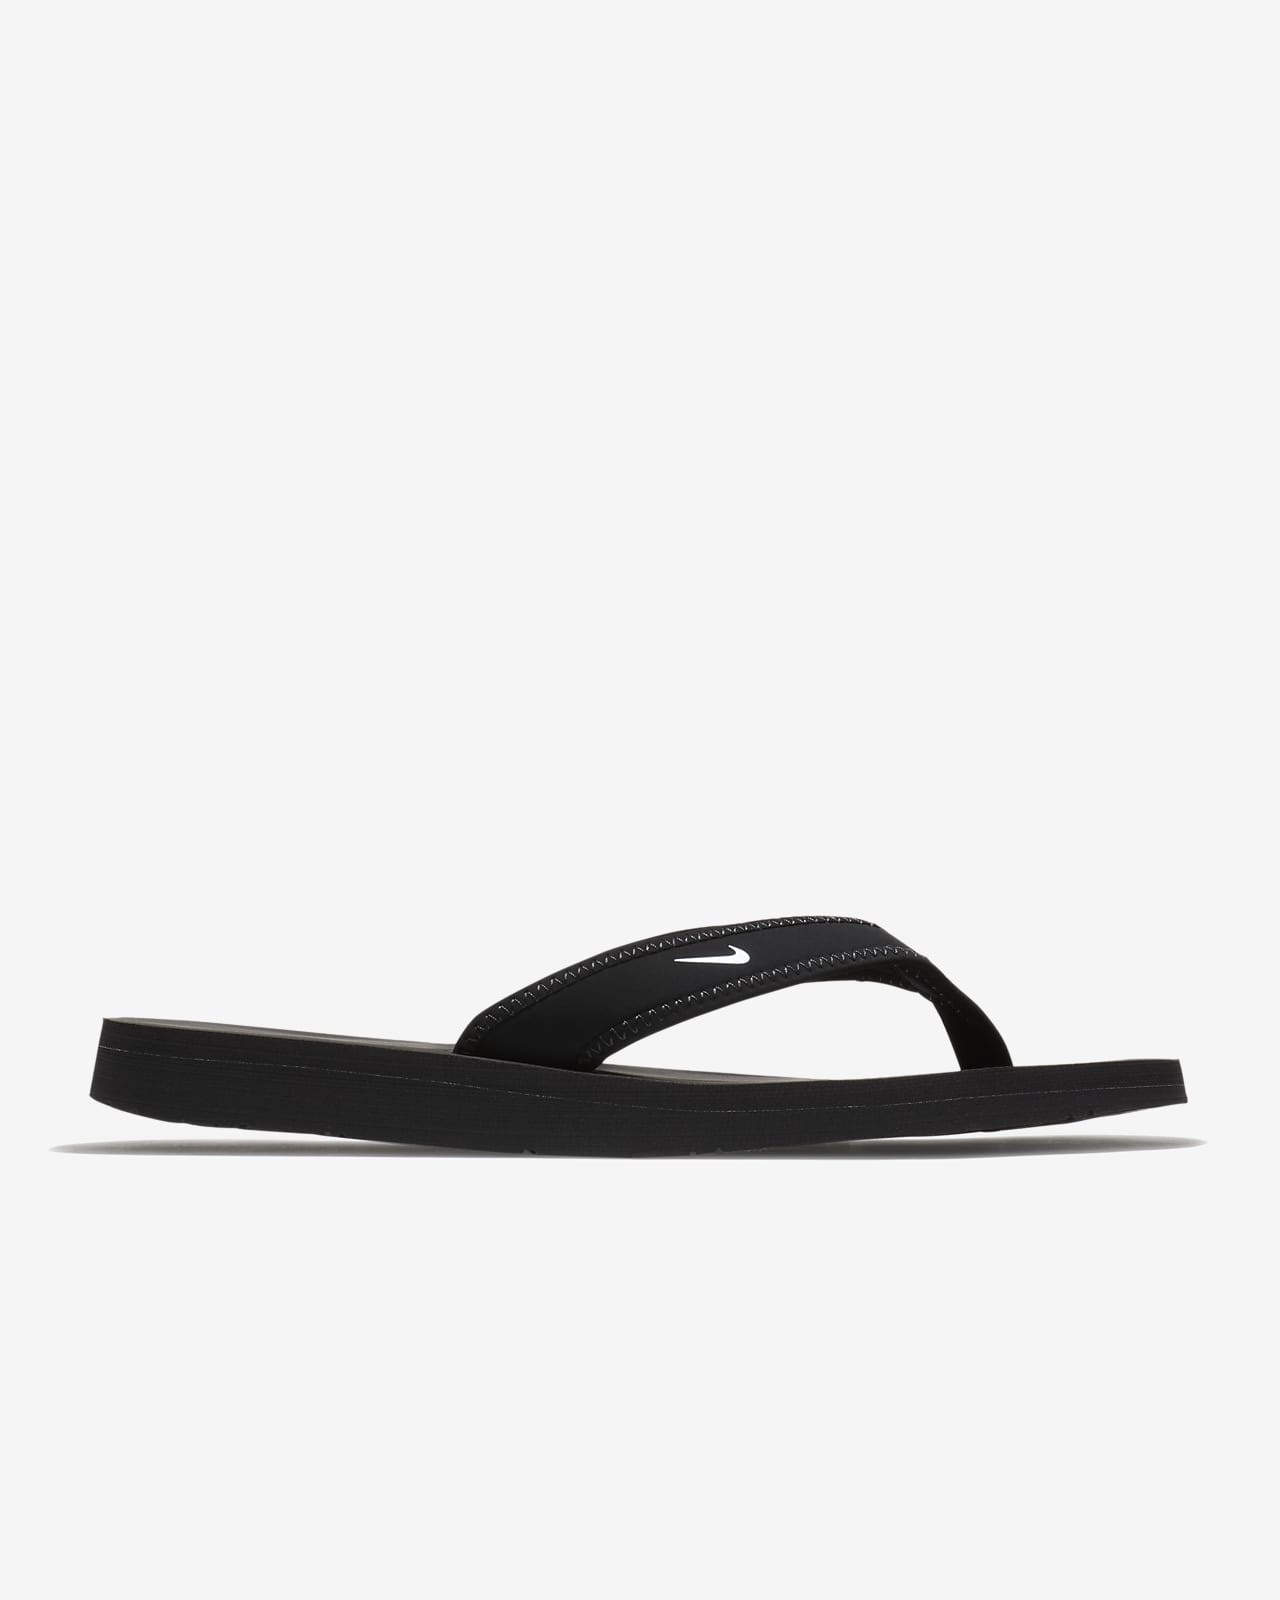 nike celso thong canada